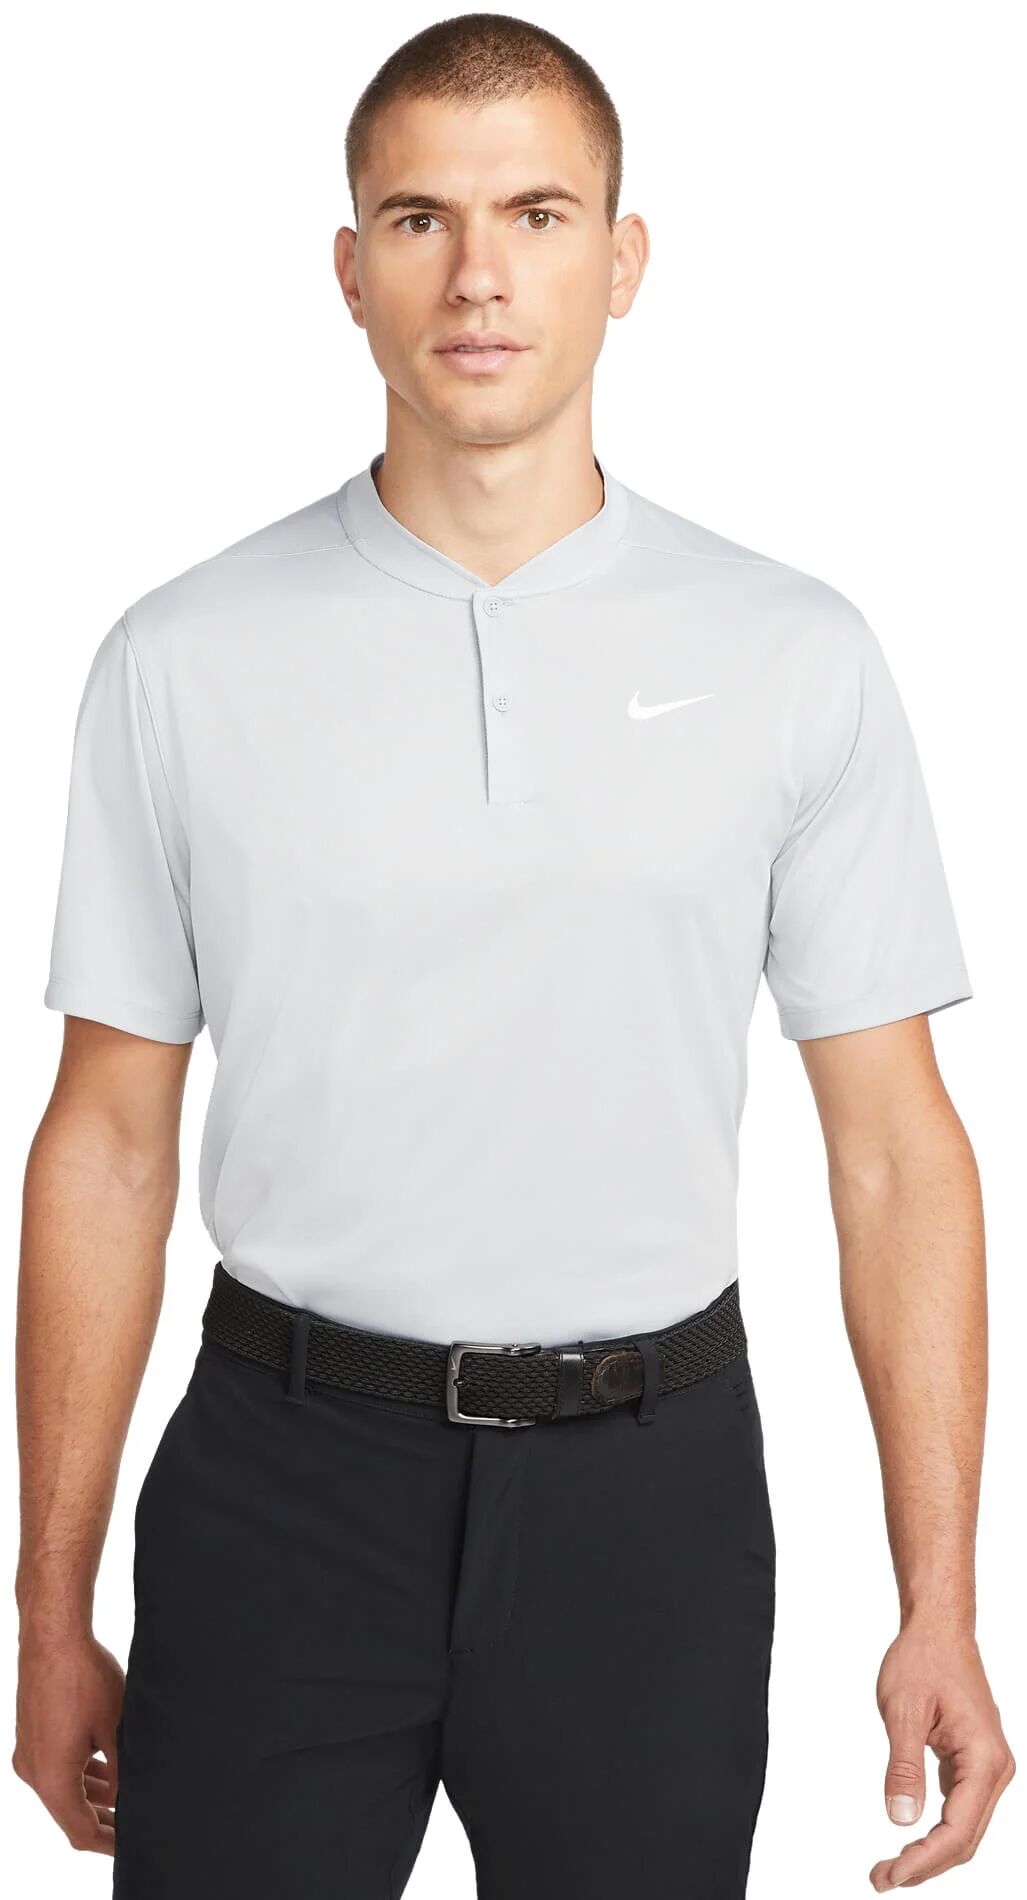 Nike Dri-FIT Victory Blade Men's Golf Polo Shirt - Grey, Size: Large